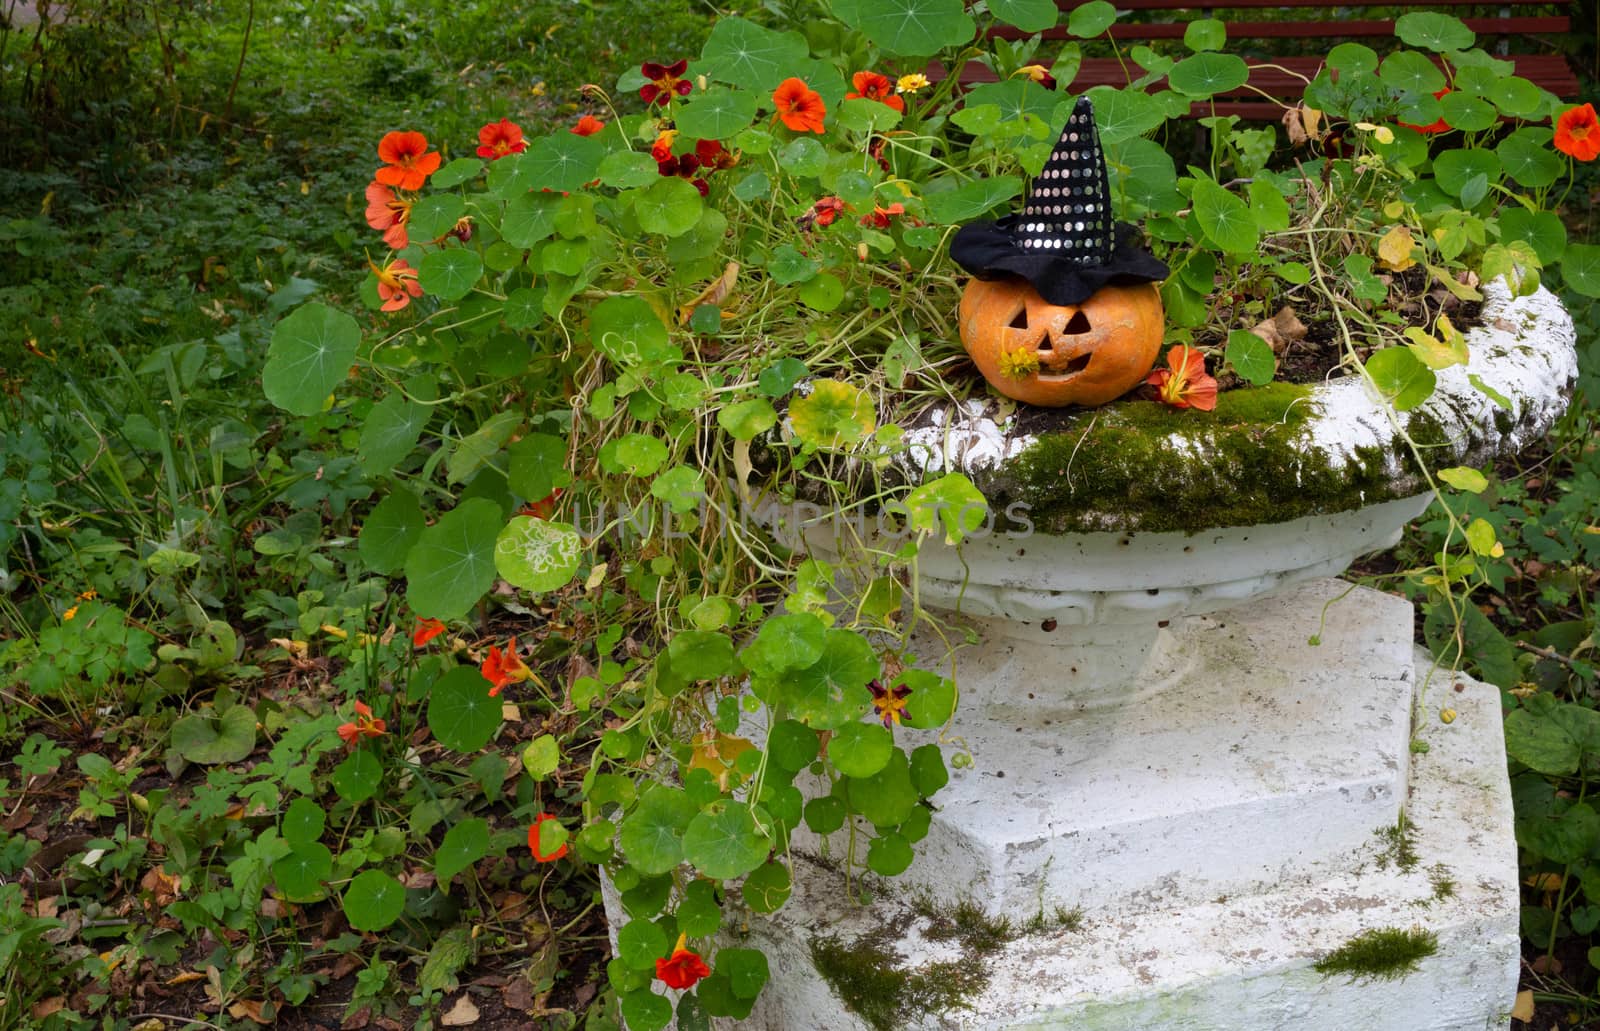 Funny pumpkin in a Witch's hat sitting on a flower bed.The Concept Of Halloween.